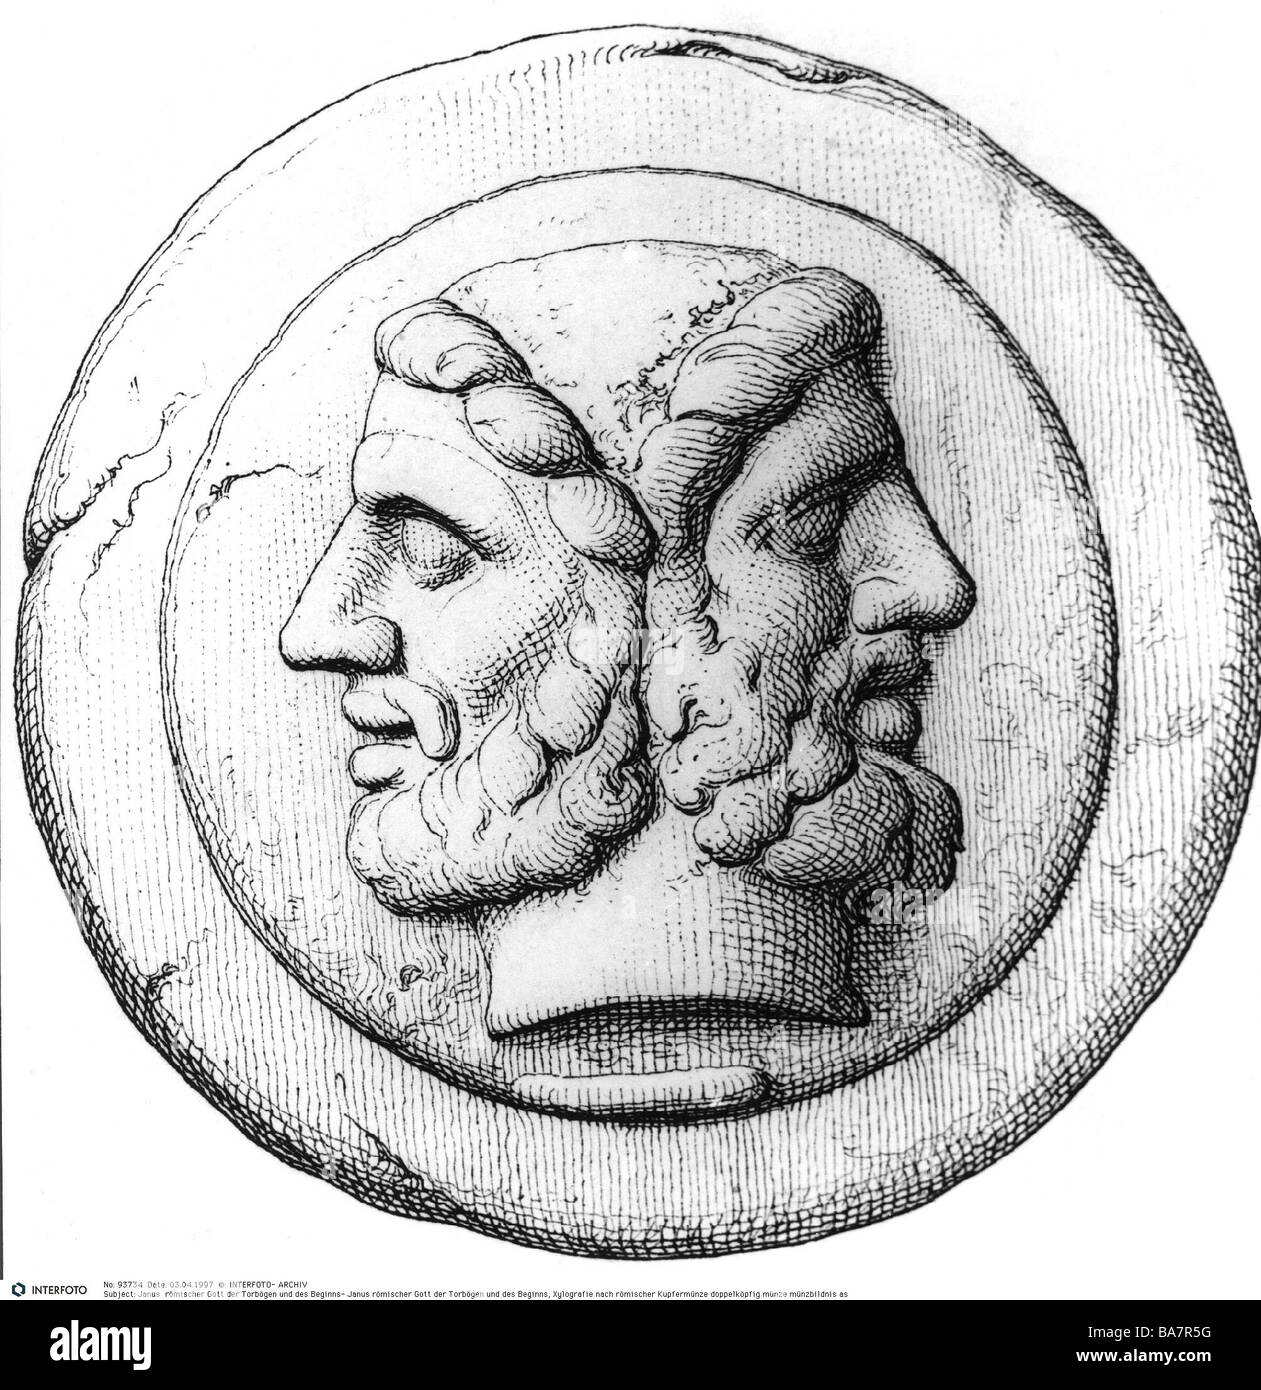 Janus, the two-faced Roman God from whose name 'Janiceps' derives.